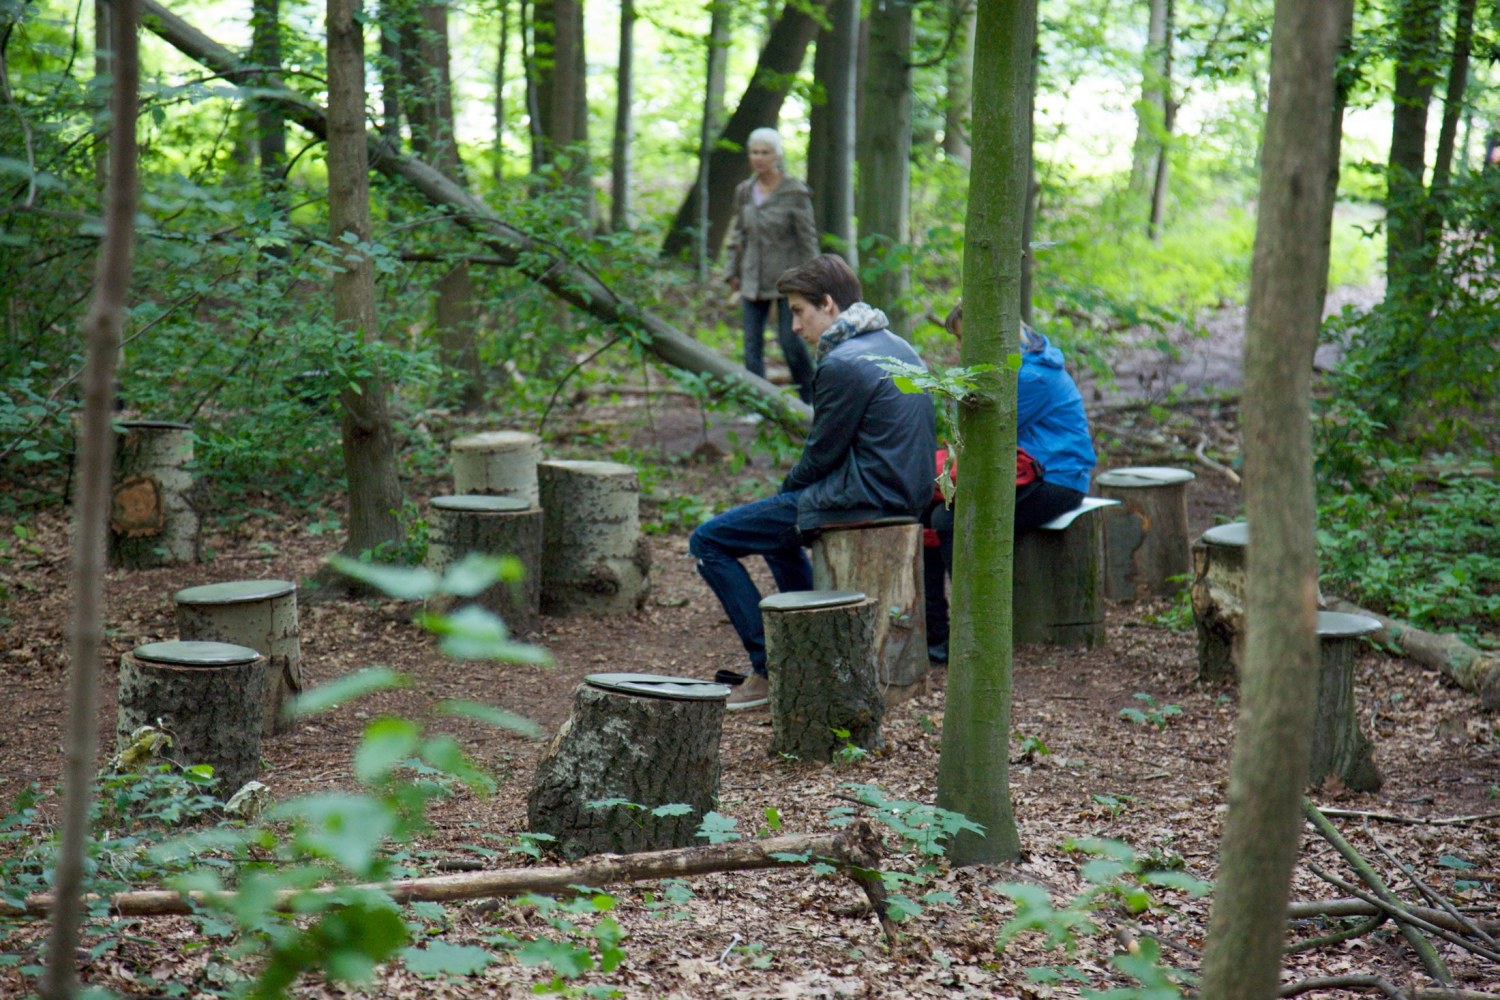 Janet Cardiff and George Bures Miller
Forest (for a thousand years...), 2012
Audio Installation
Duration: 28 minutes,&amp;nbsp;looped
Presented at dOCUMENTA (13), Kassel, Germany